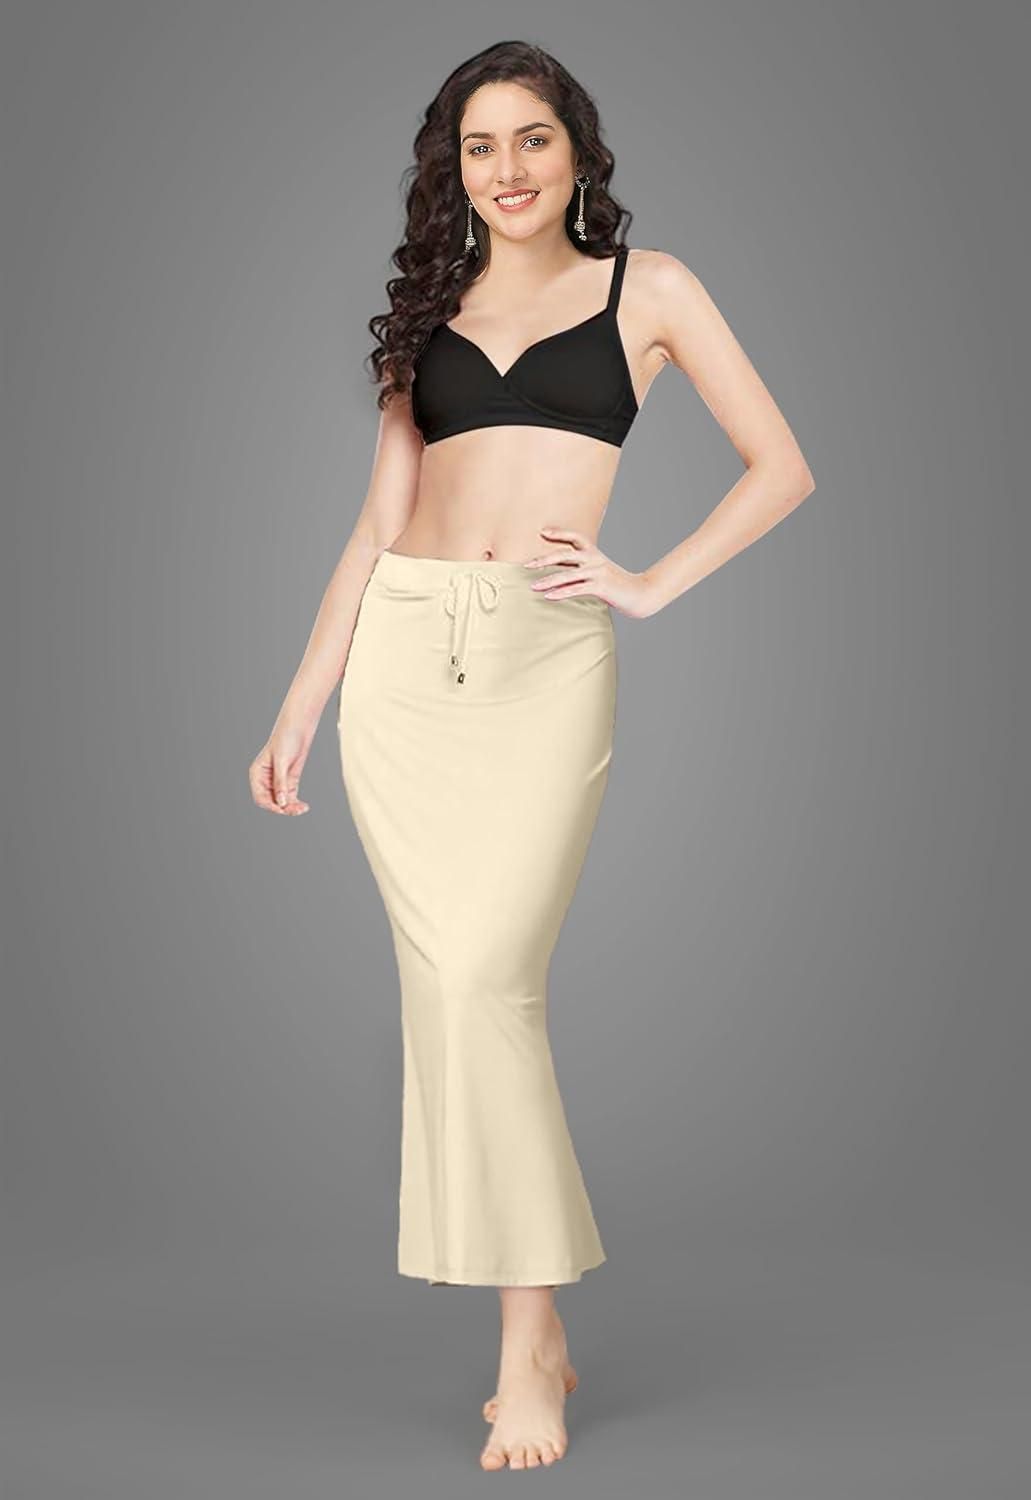 Get Skin Color Shapewear For Women By Mehrang at Rs.375/Piece in surat  offer by Mehrang